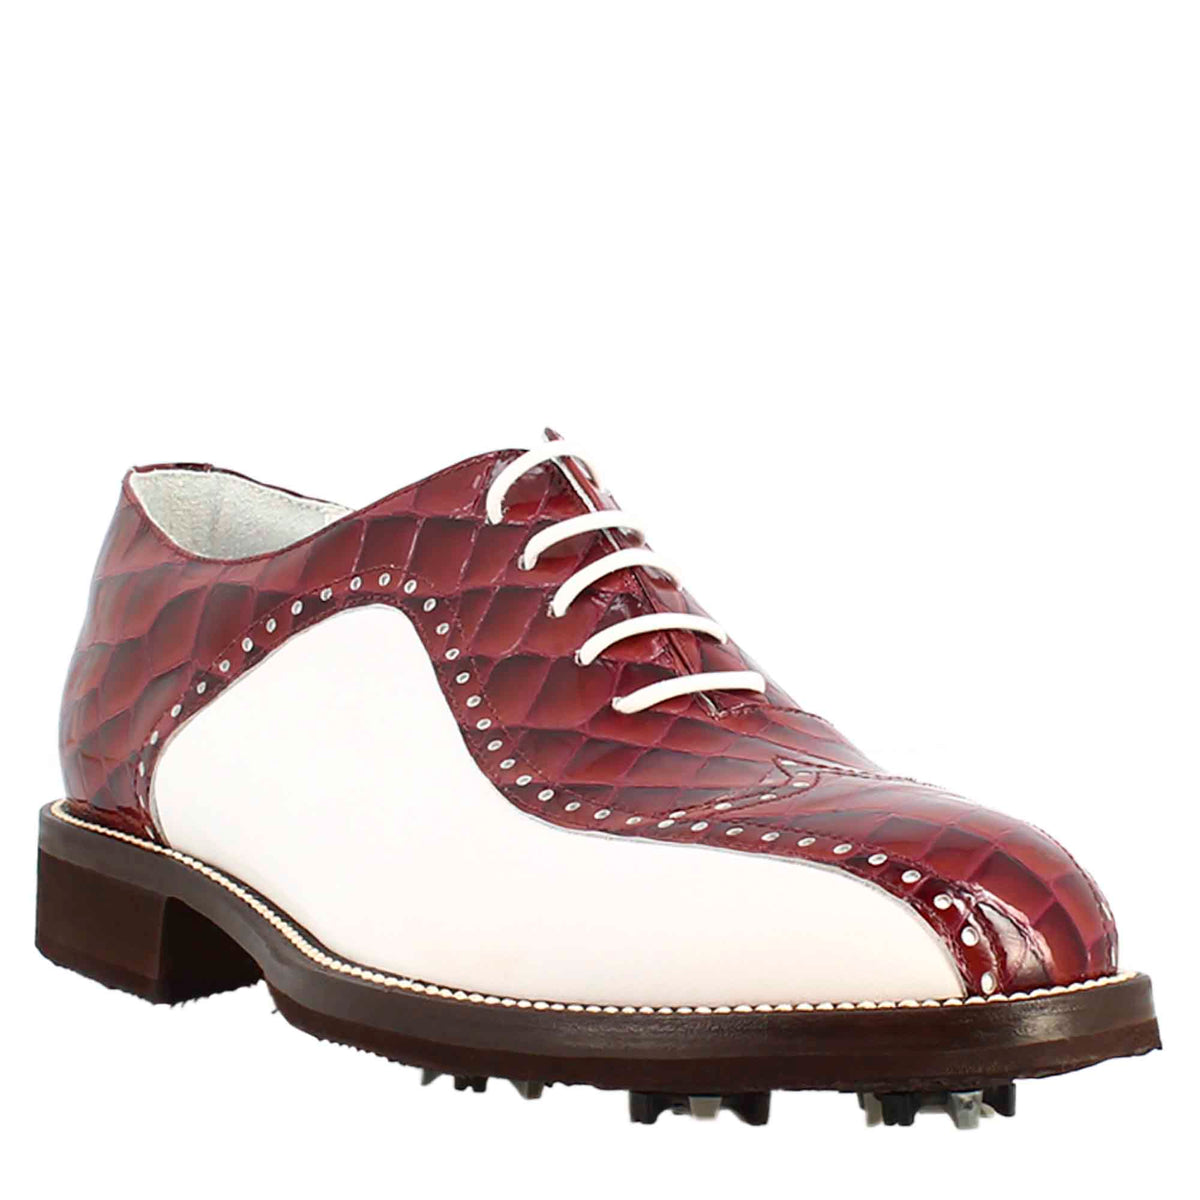 Handcrafted white and bordeaux coconut leather men's golf shoes